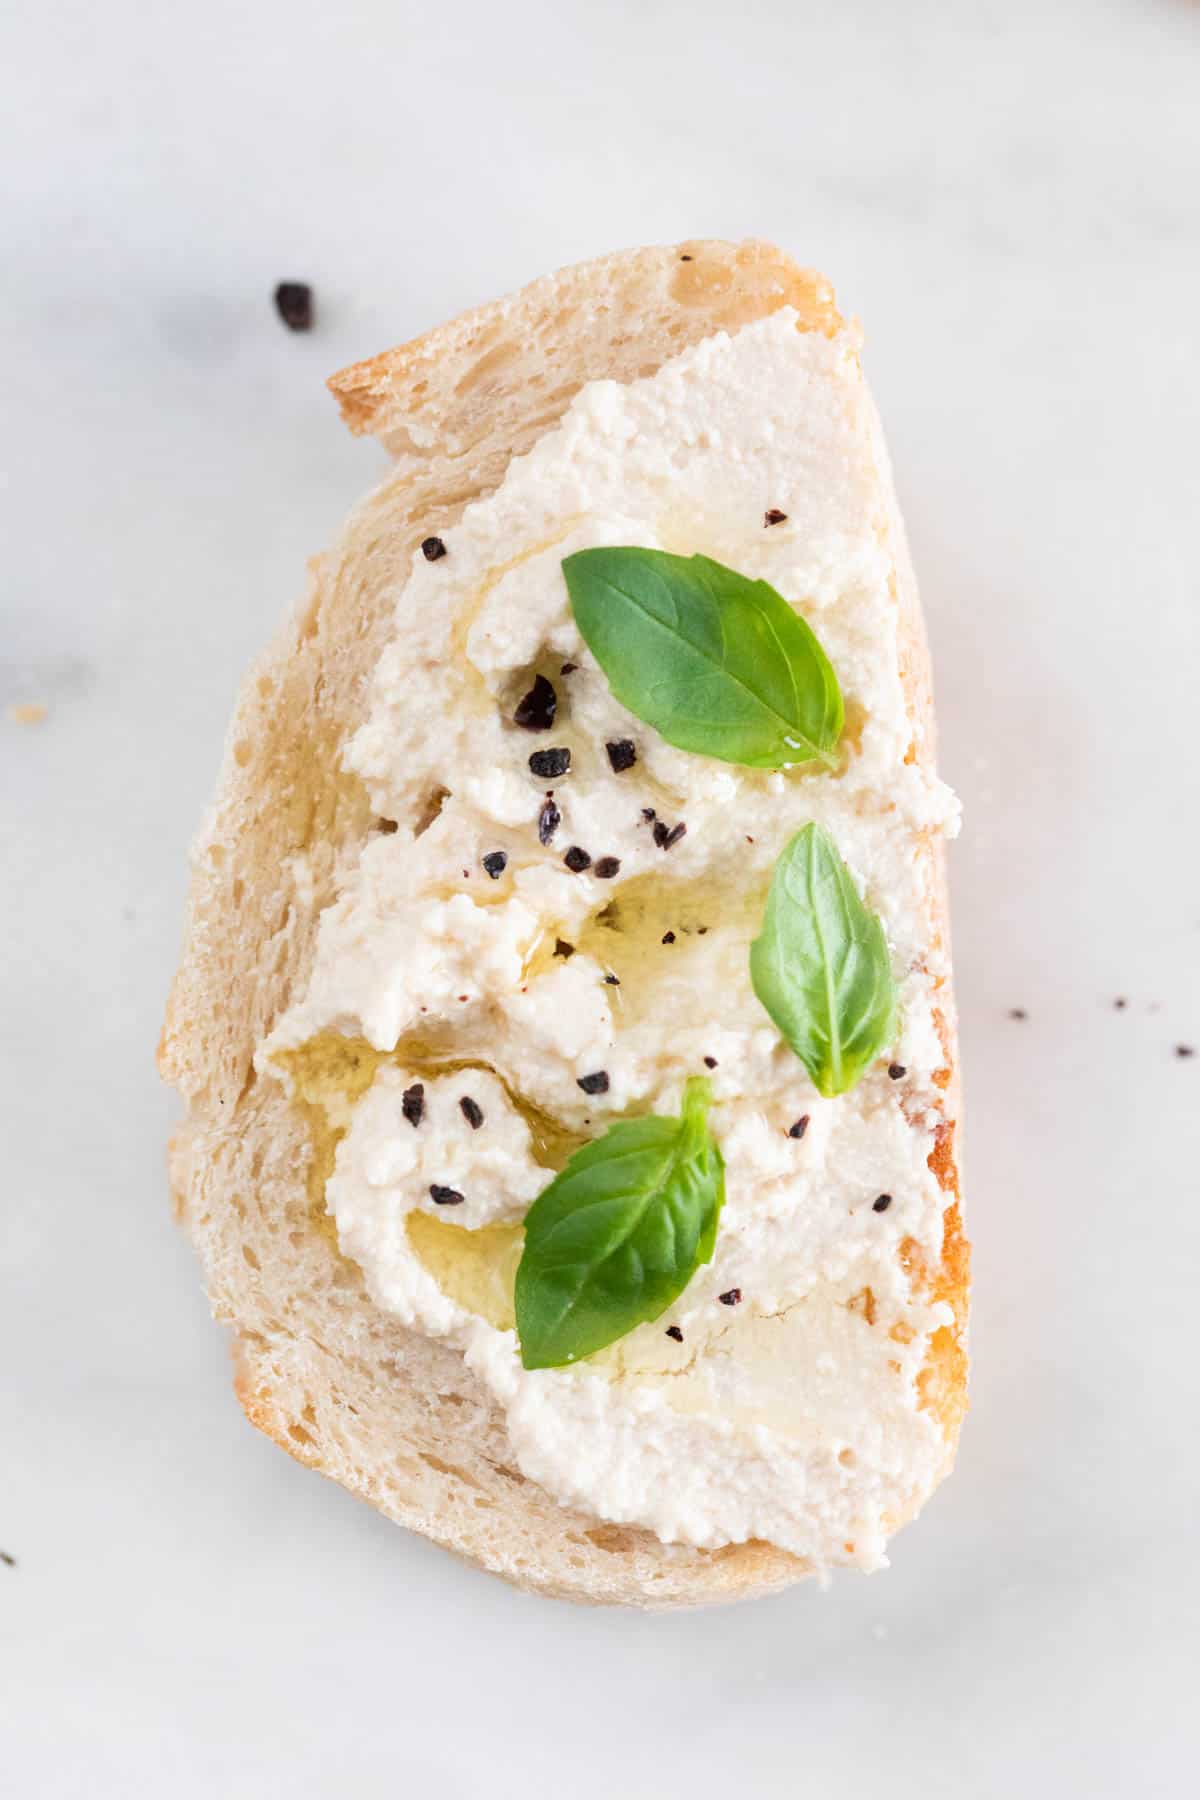 A slice of bread spread with some vegan tofu ricotta cheese and some basil leaves, black pepper and olive oil on top.